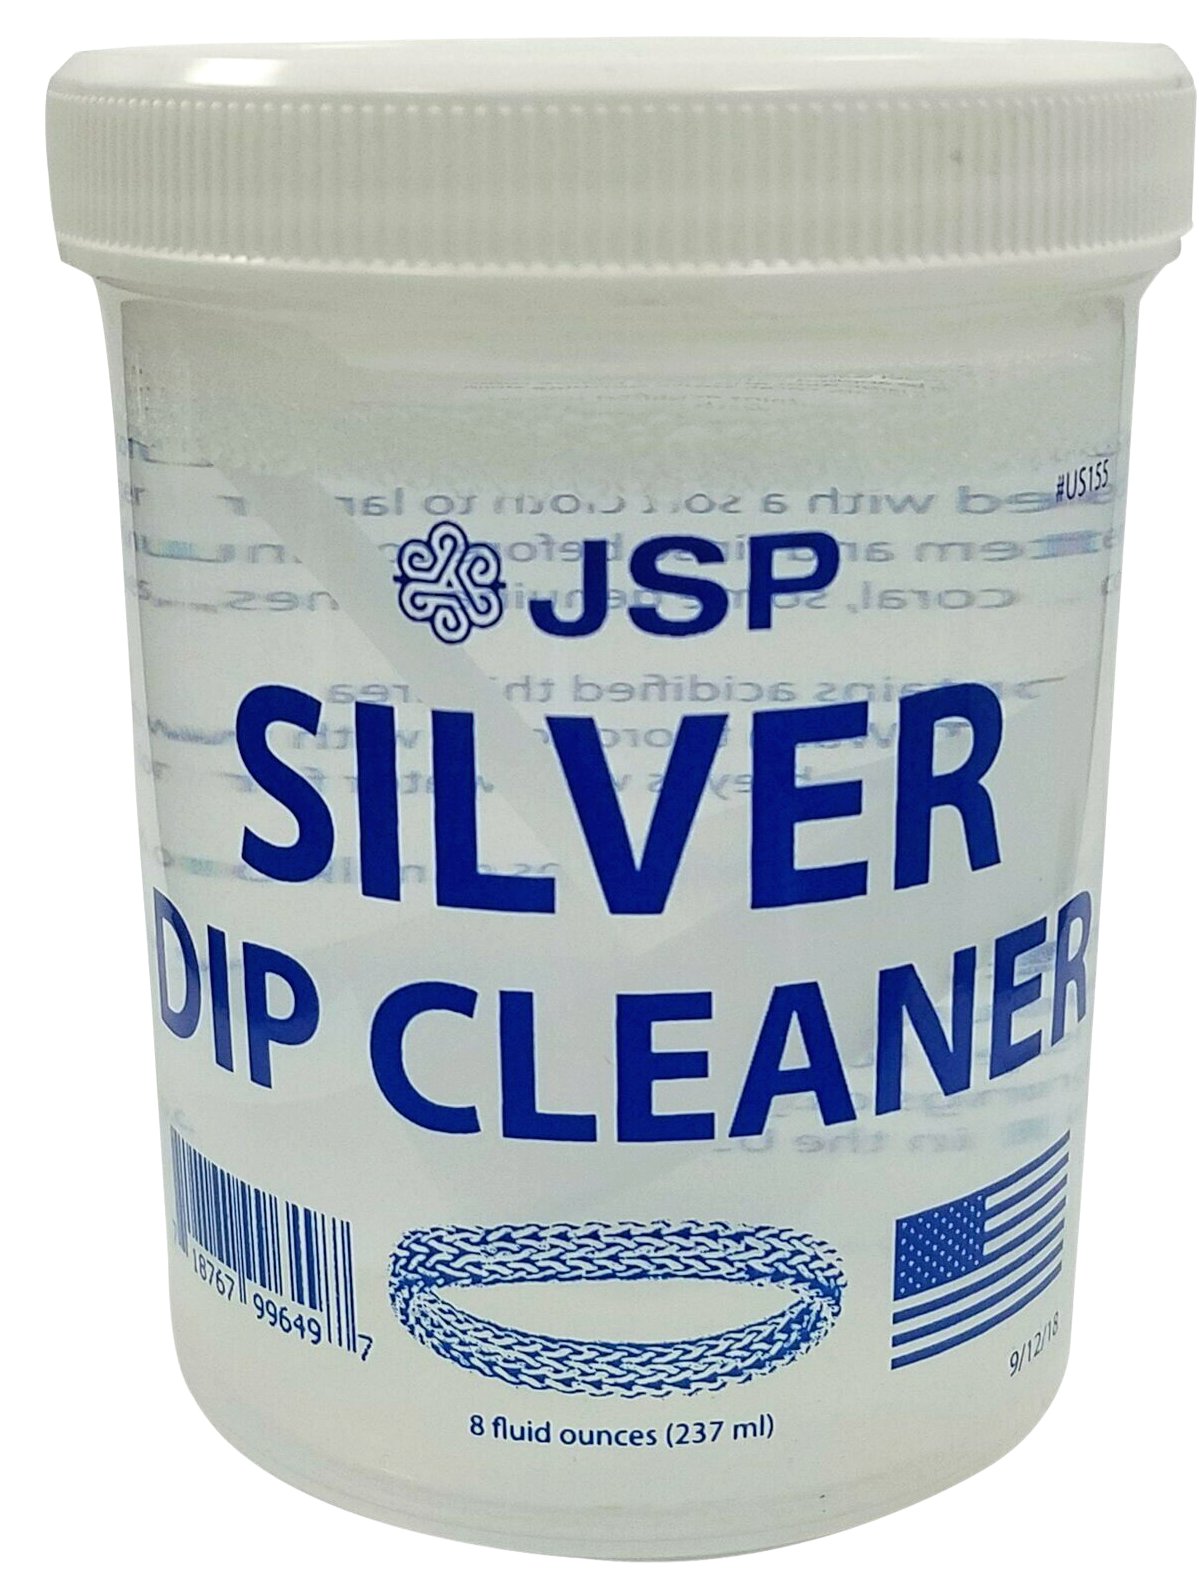 Case of 24 Sterling Silver Dip Cleaner Tarnish Remover 925 Jewelry Cleaning Solution 8oz